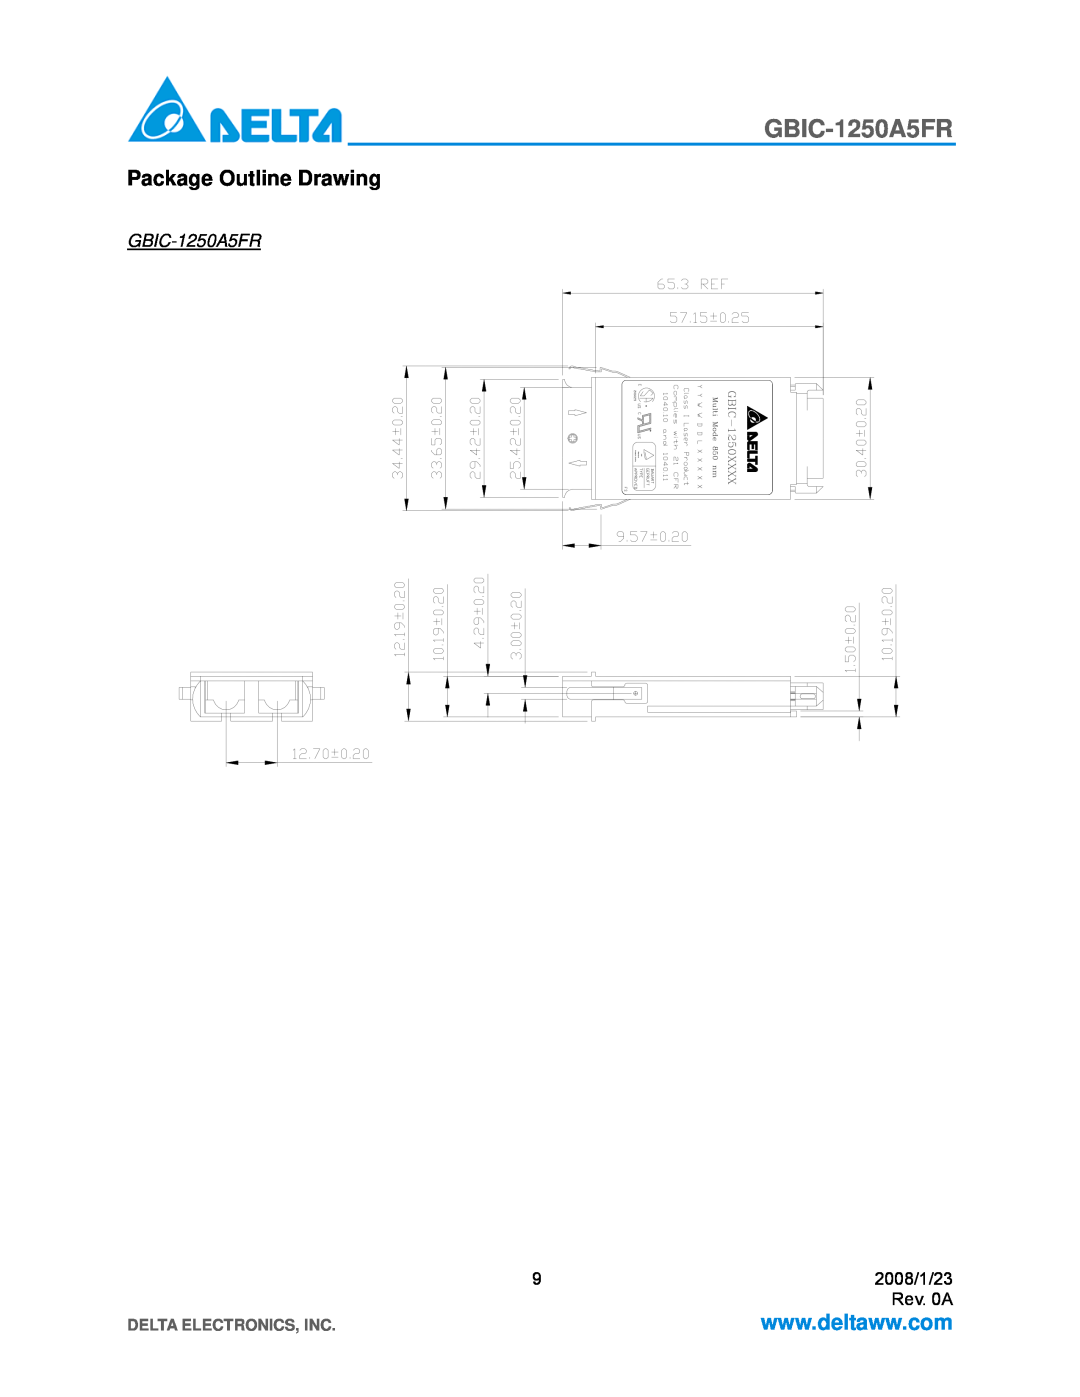 Delta Electronics GBIC-1250A5FR specifications Package Outline Drawing, Delta Electronics, Inc 